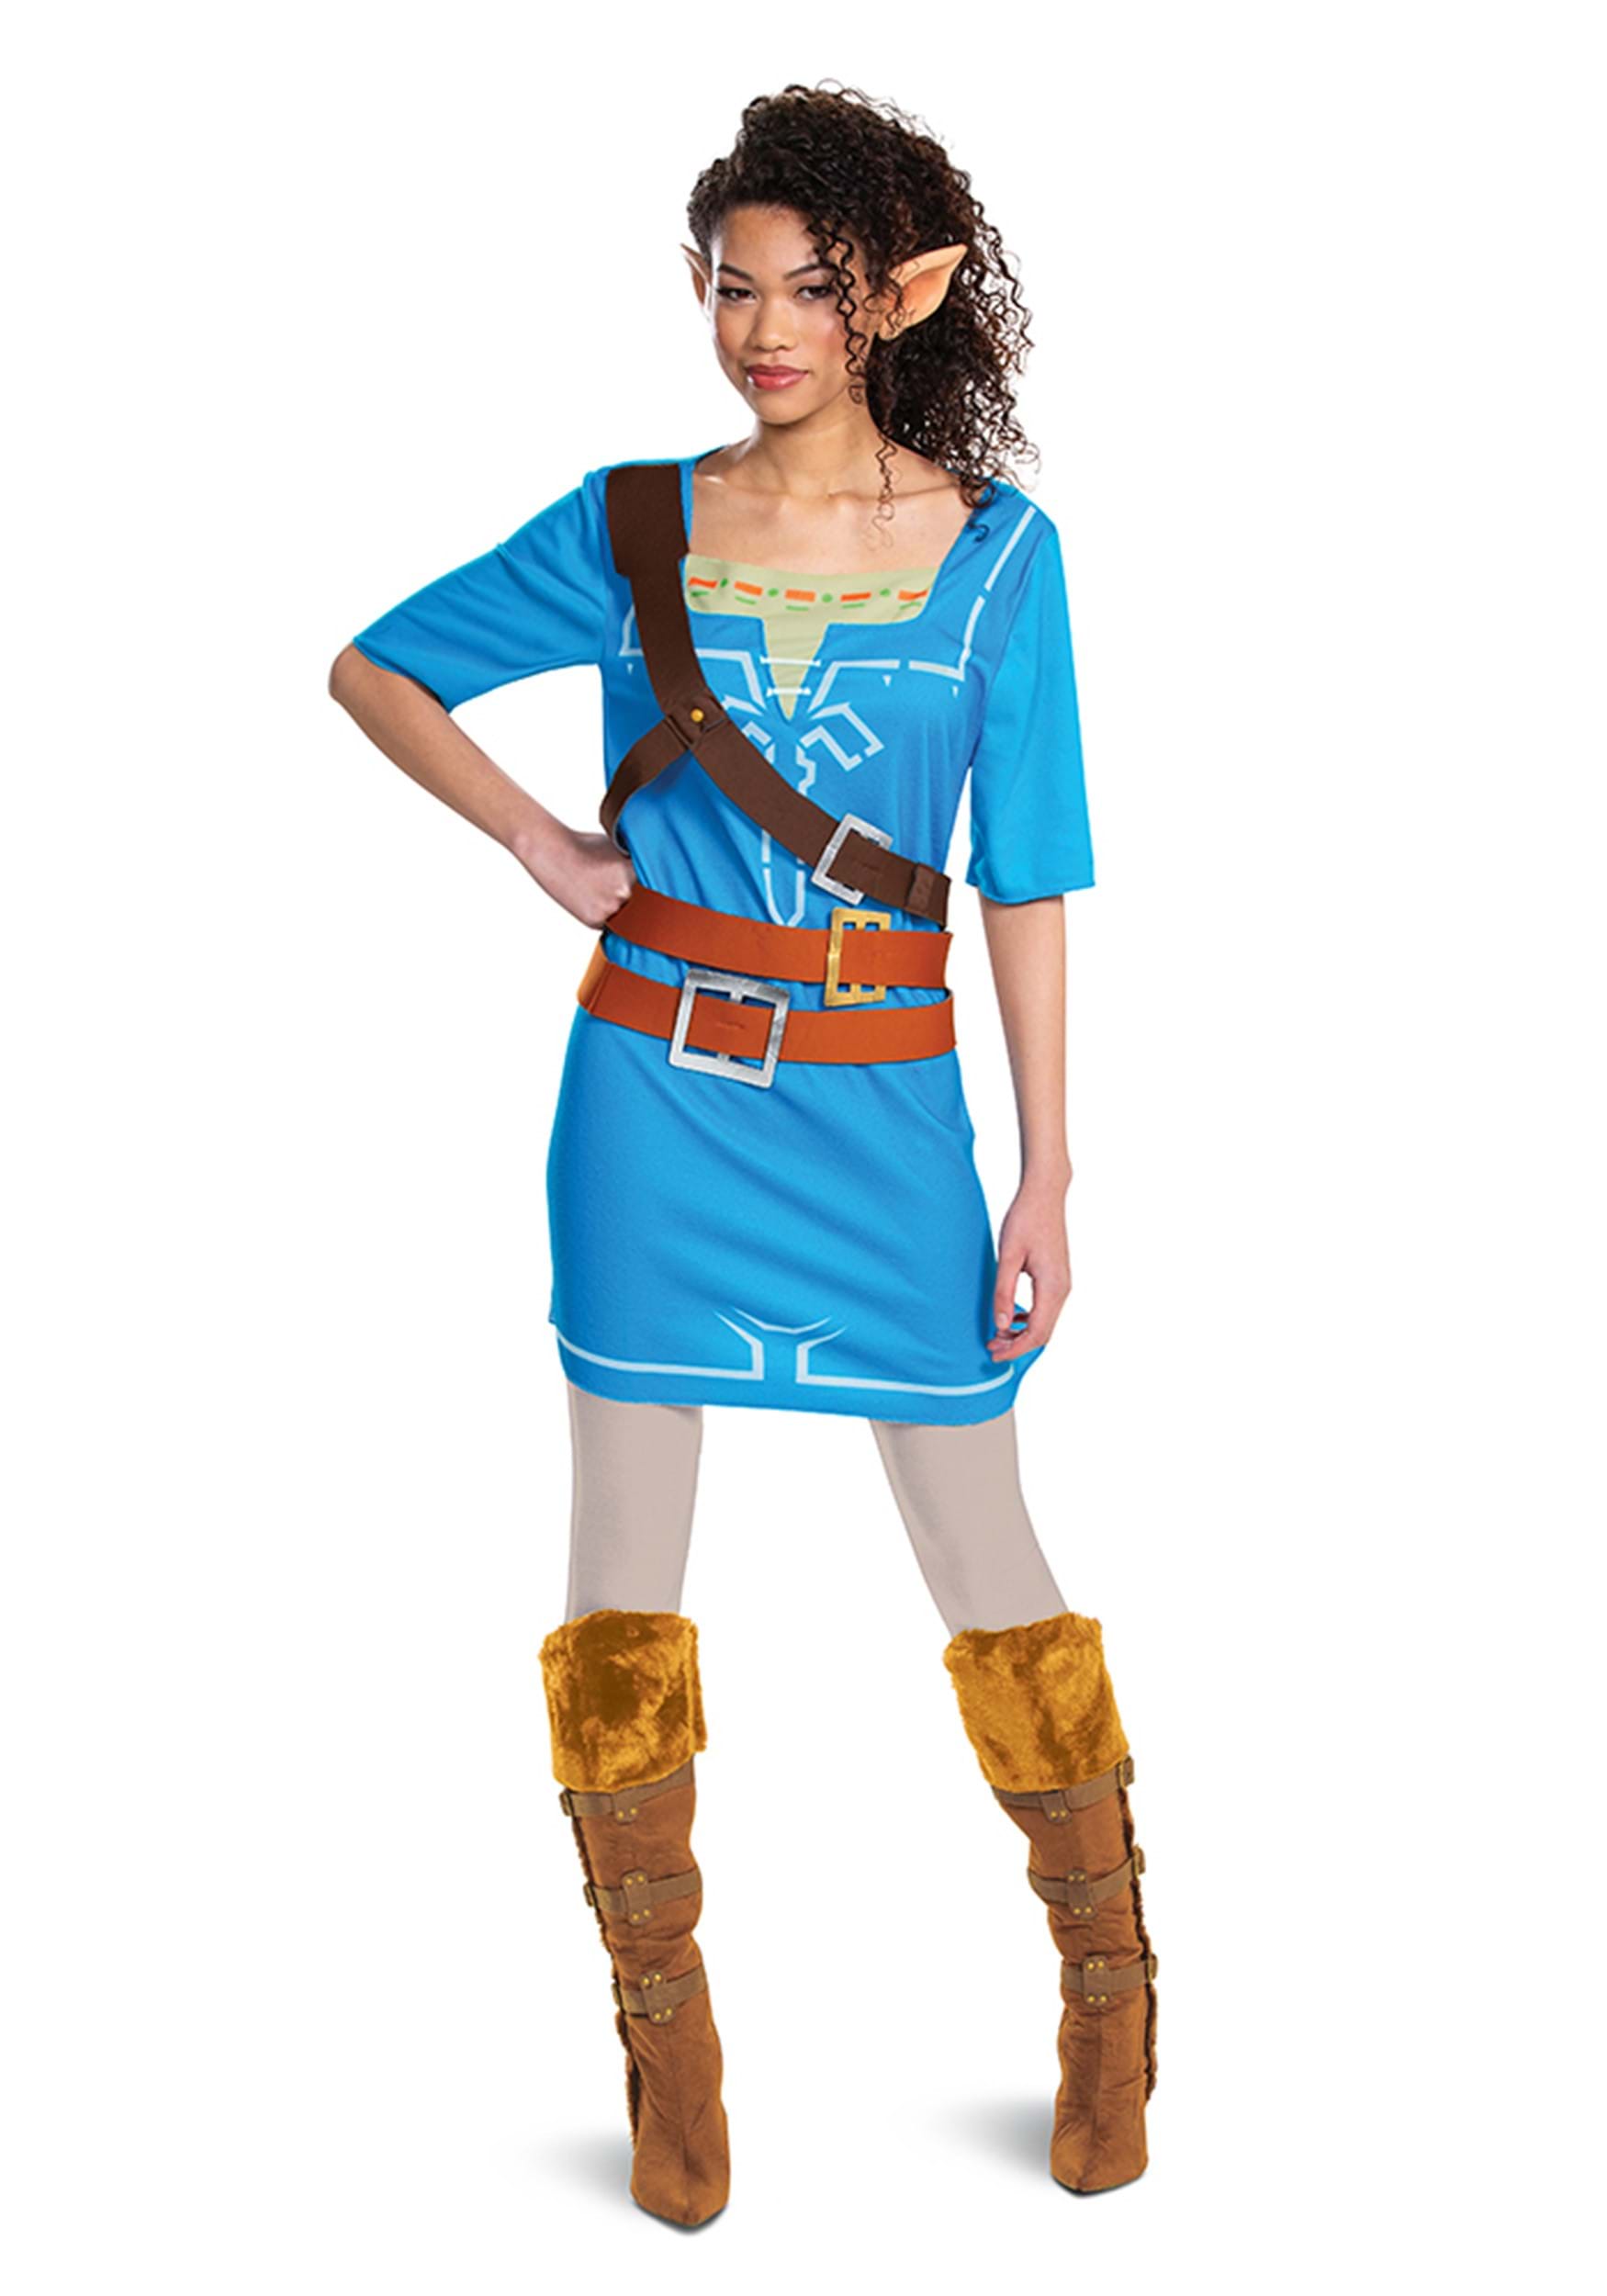 Link Breath Of The Wild Classic Adult Fancy Dress Costume